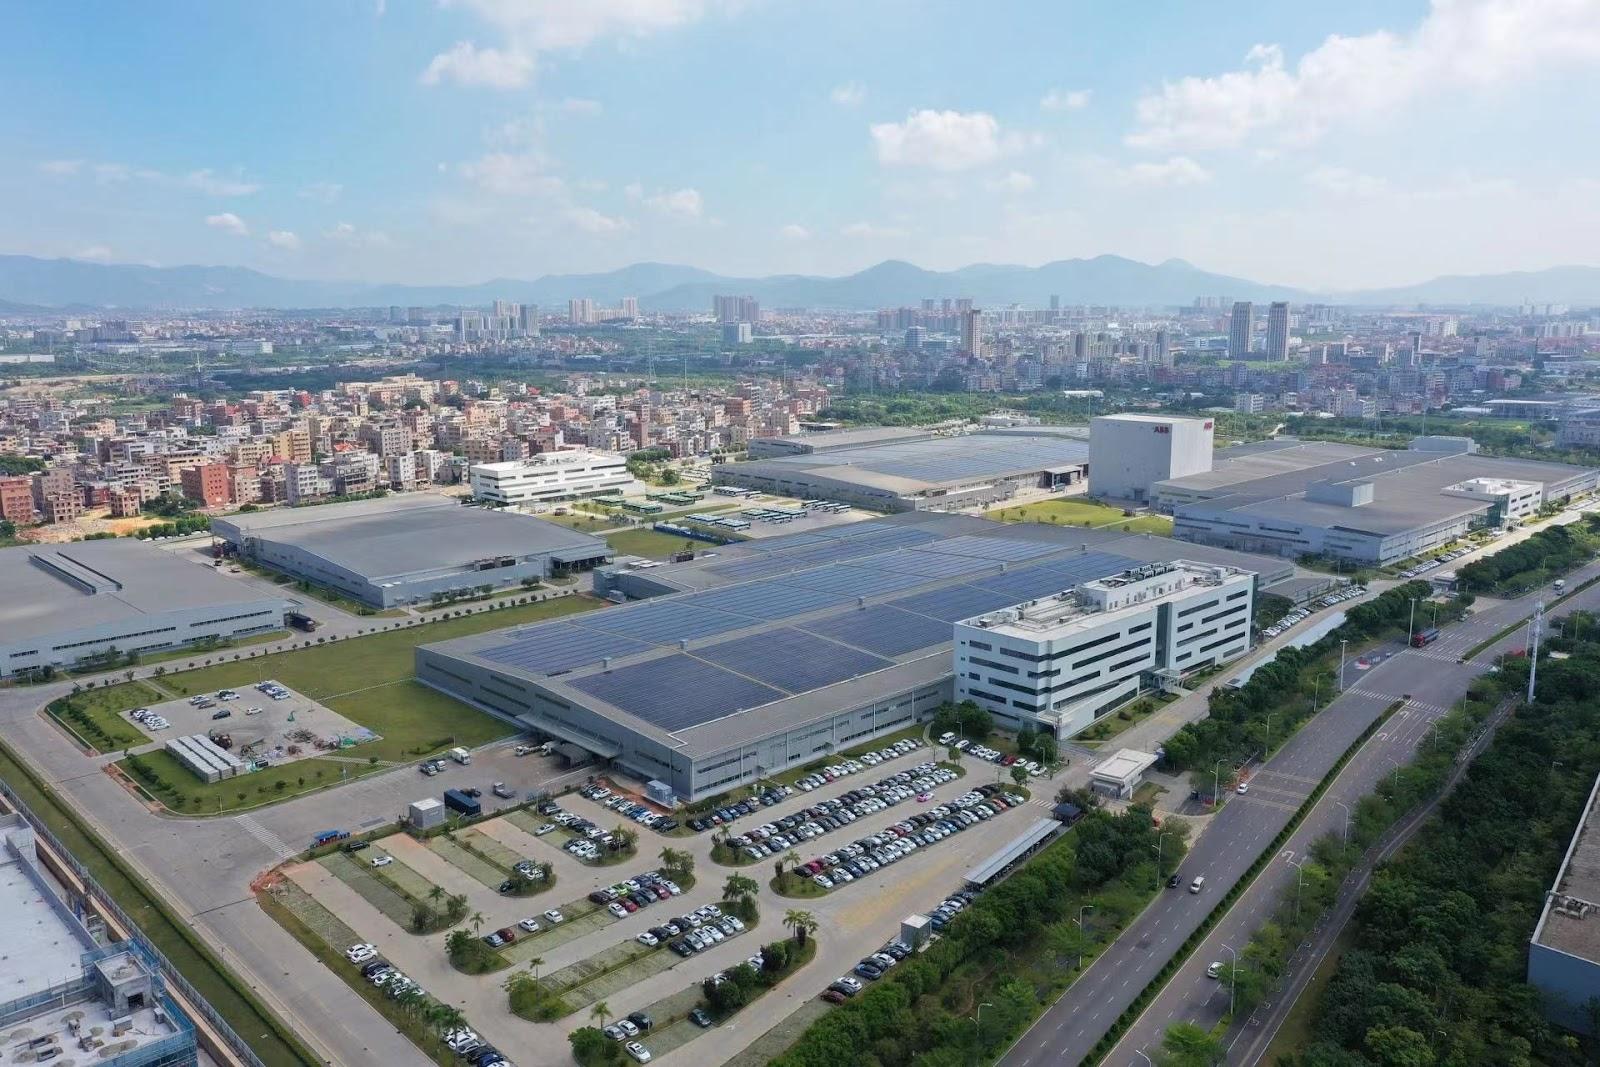 A collection of solar panels lies atop ABB’s 425,000-square-meter production facility in Xiamen, China. Image used courtesy of ABB